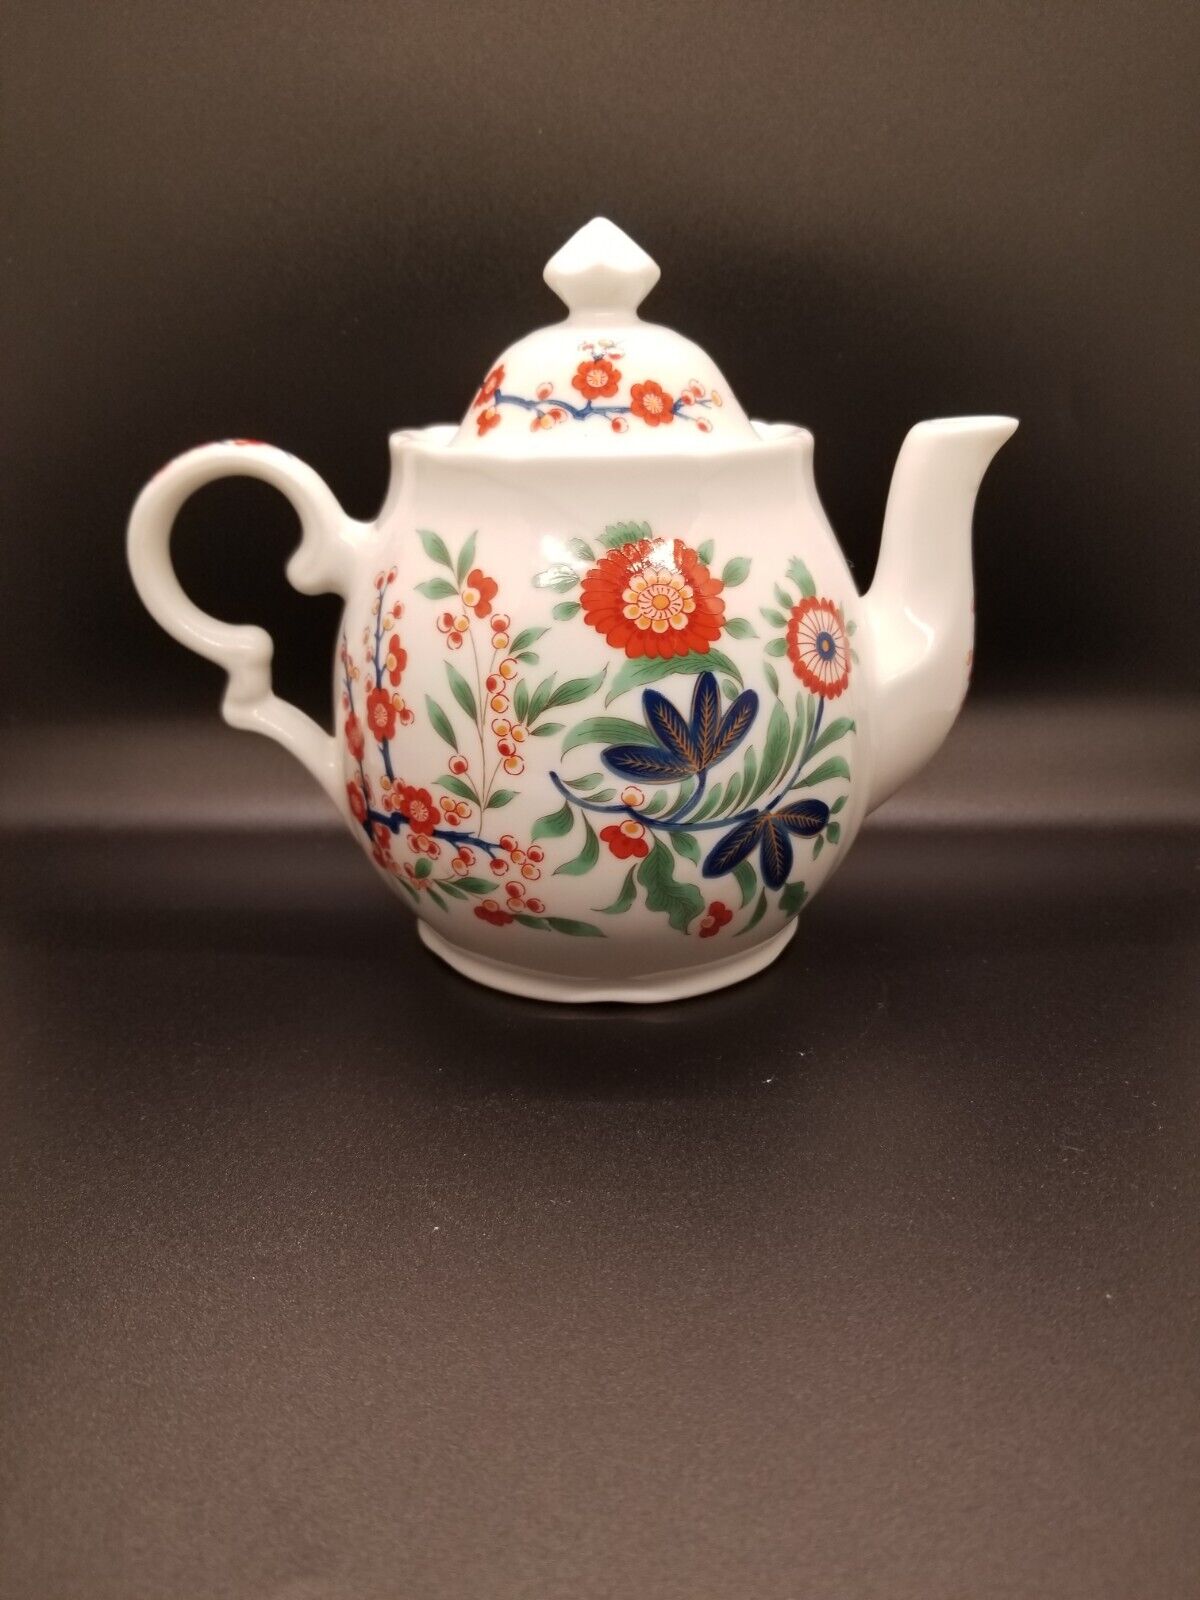 Teapot, Japanese Kakiemon style design, Smithsonian collection, colorful floral